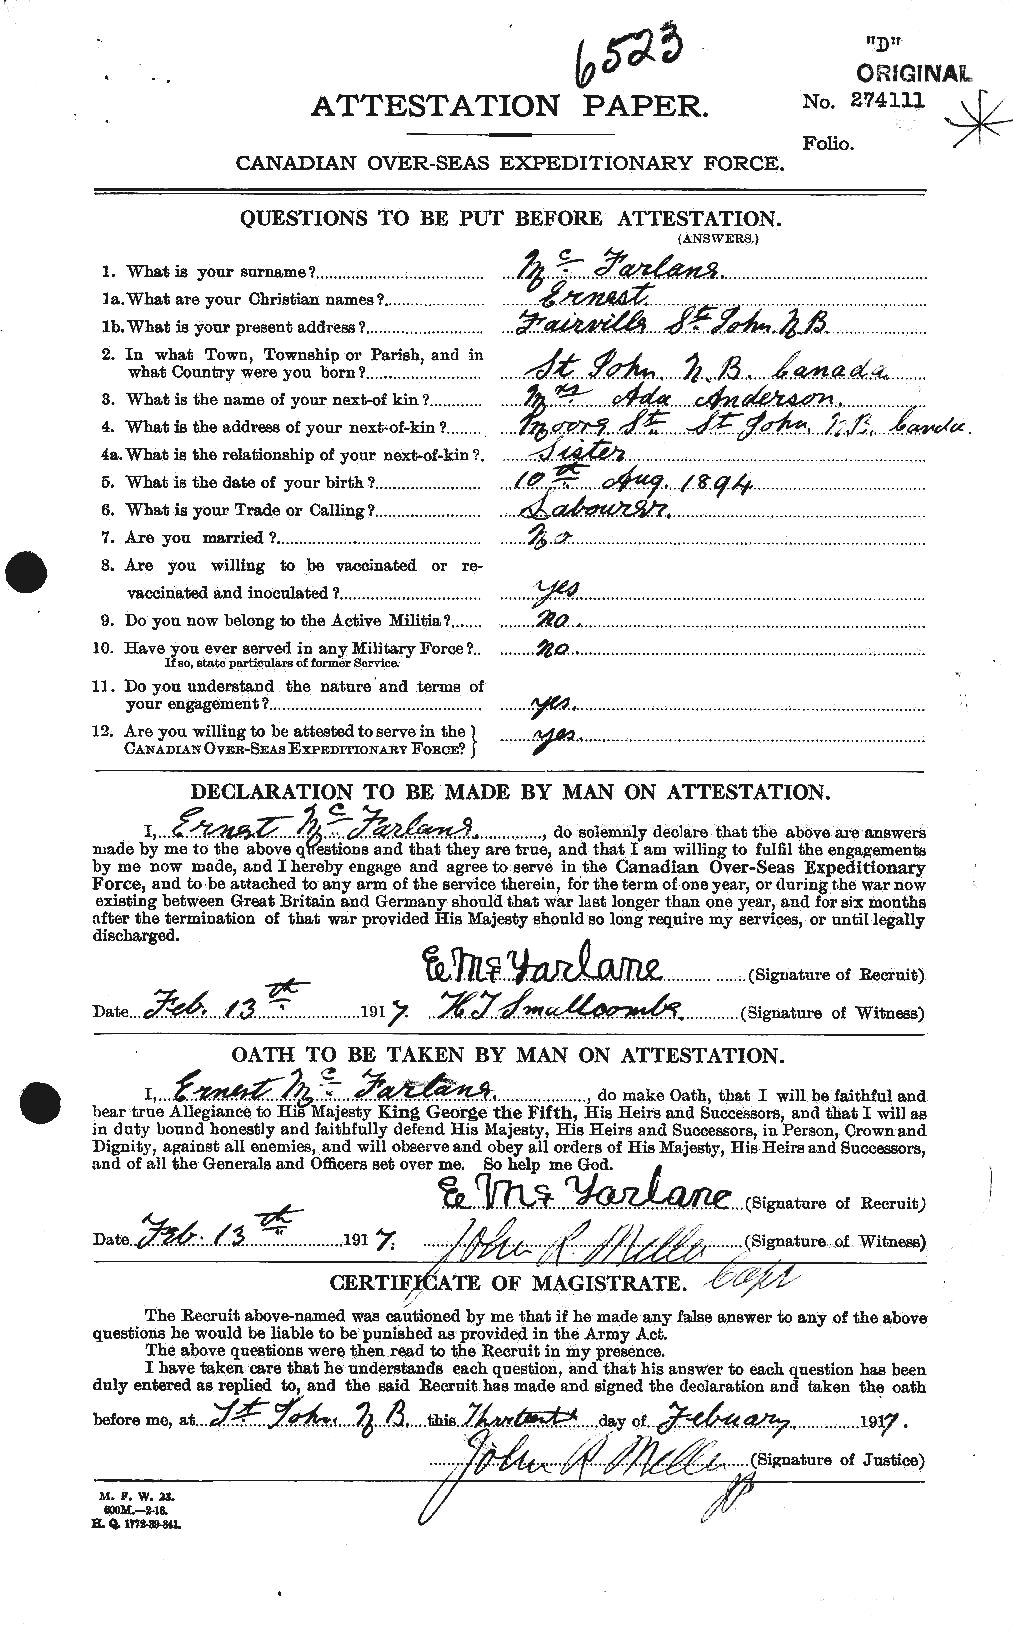 Personnel Records of the First World War - CEF 521783a